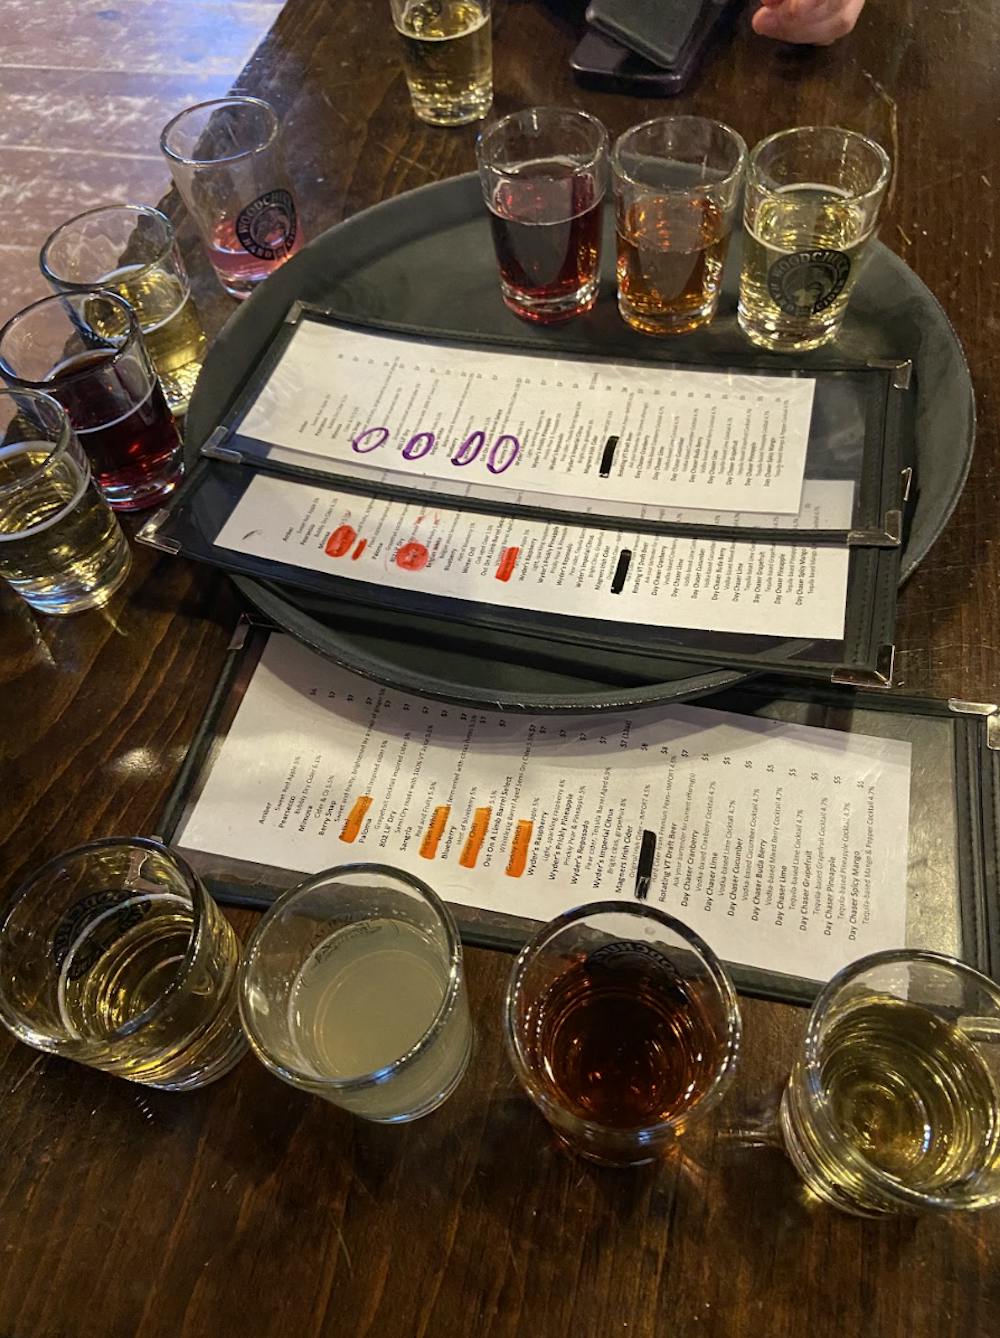 Woodchuck Cidery offers four two-ounce customizable flights for $5.